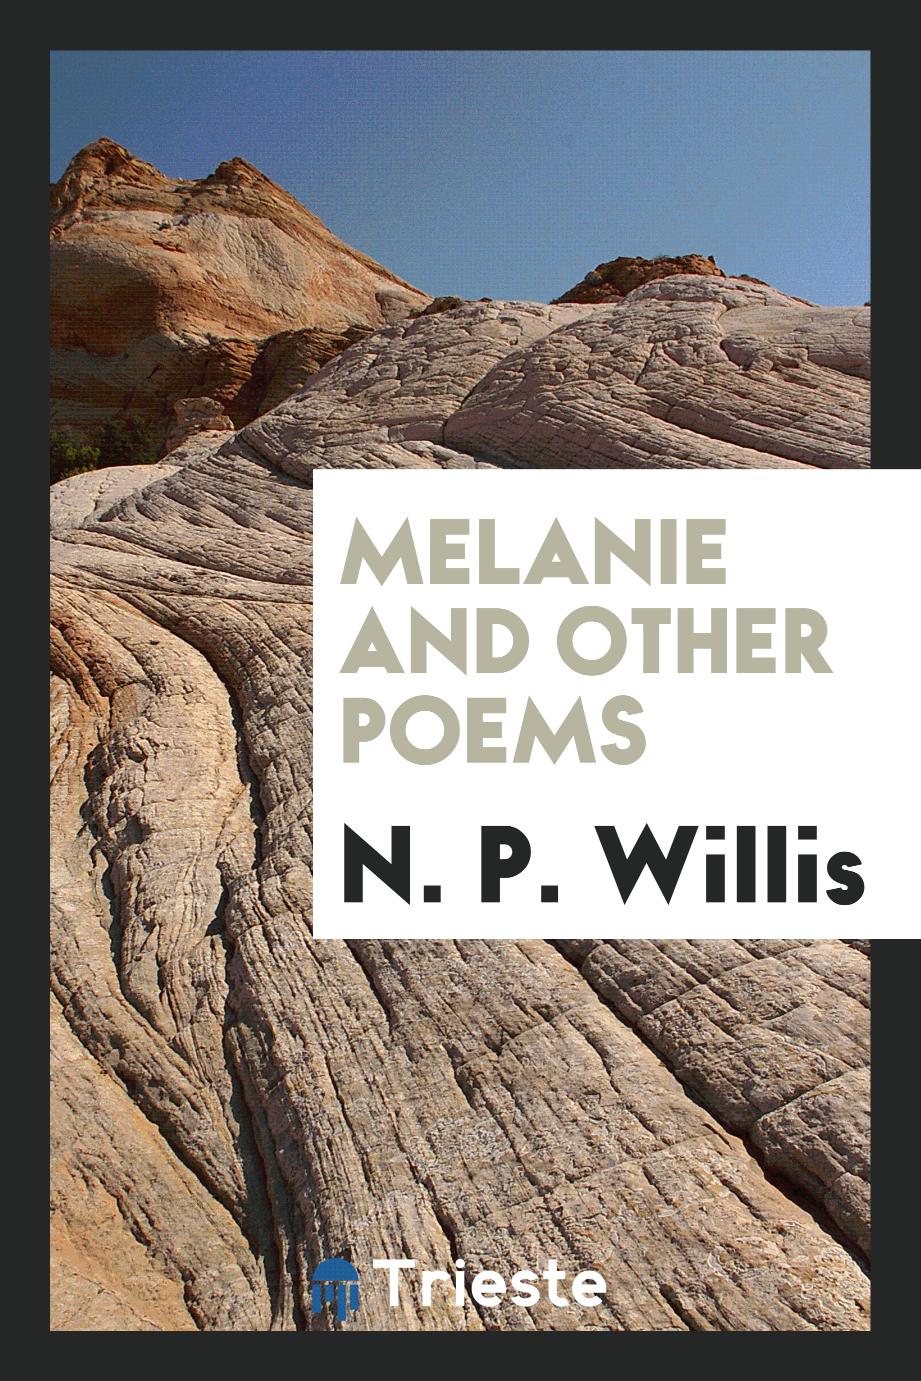 Melanie and other poems